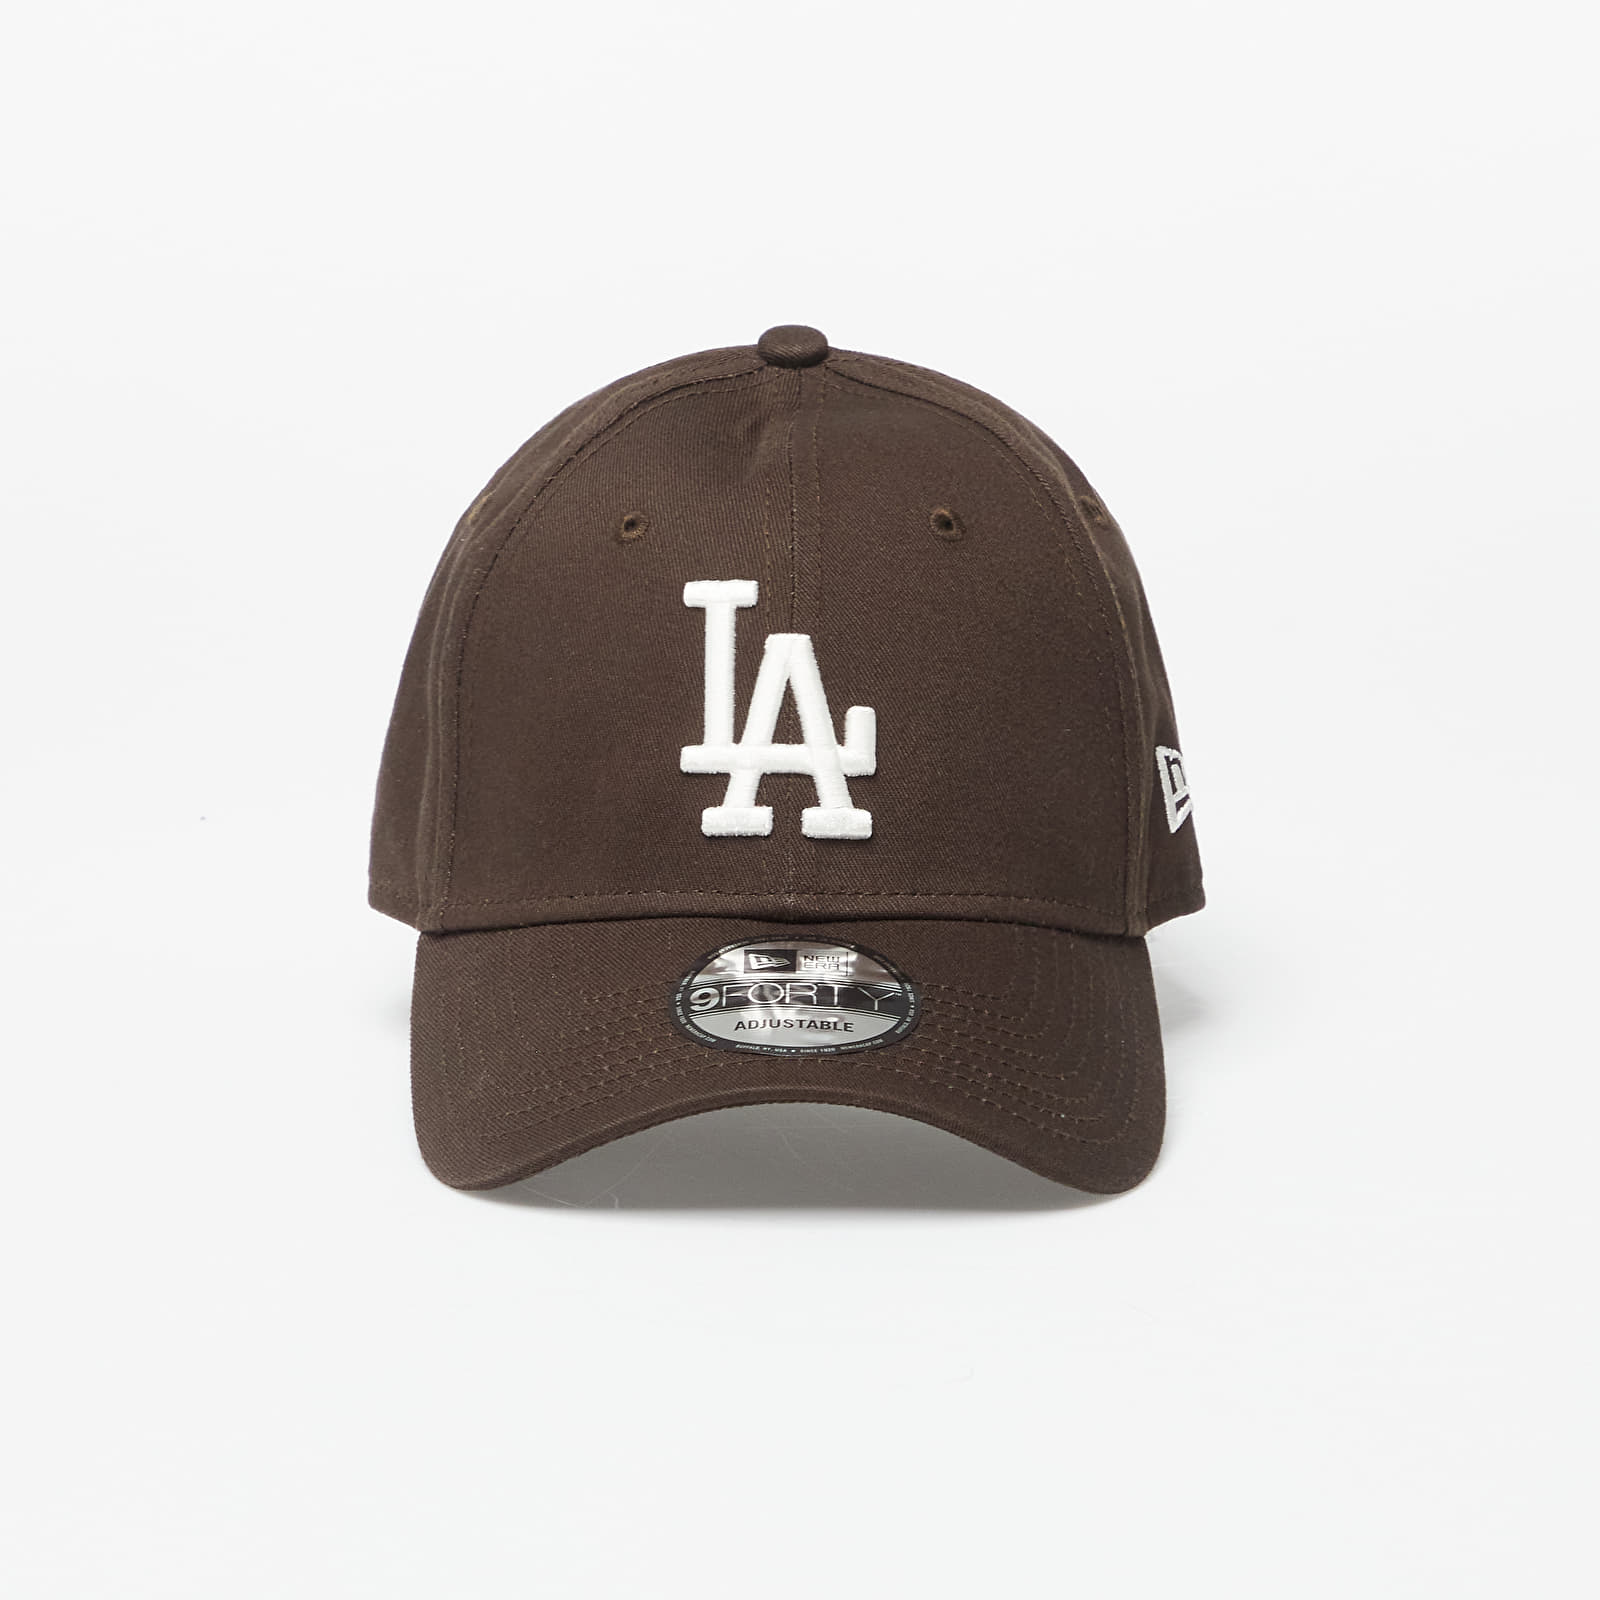 New Era - los angeles dodgers league essential 9forty adjustable cap brown suede/ off white